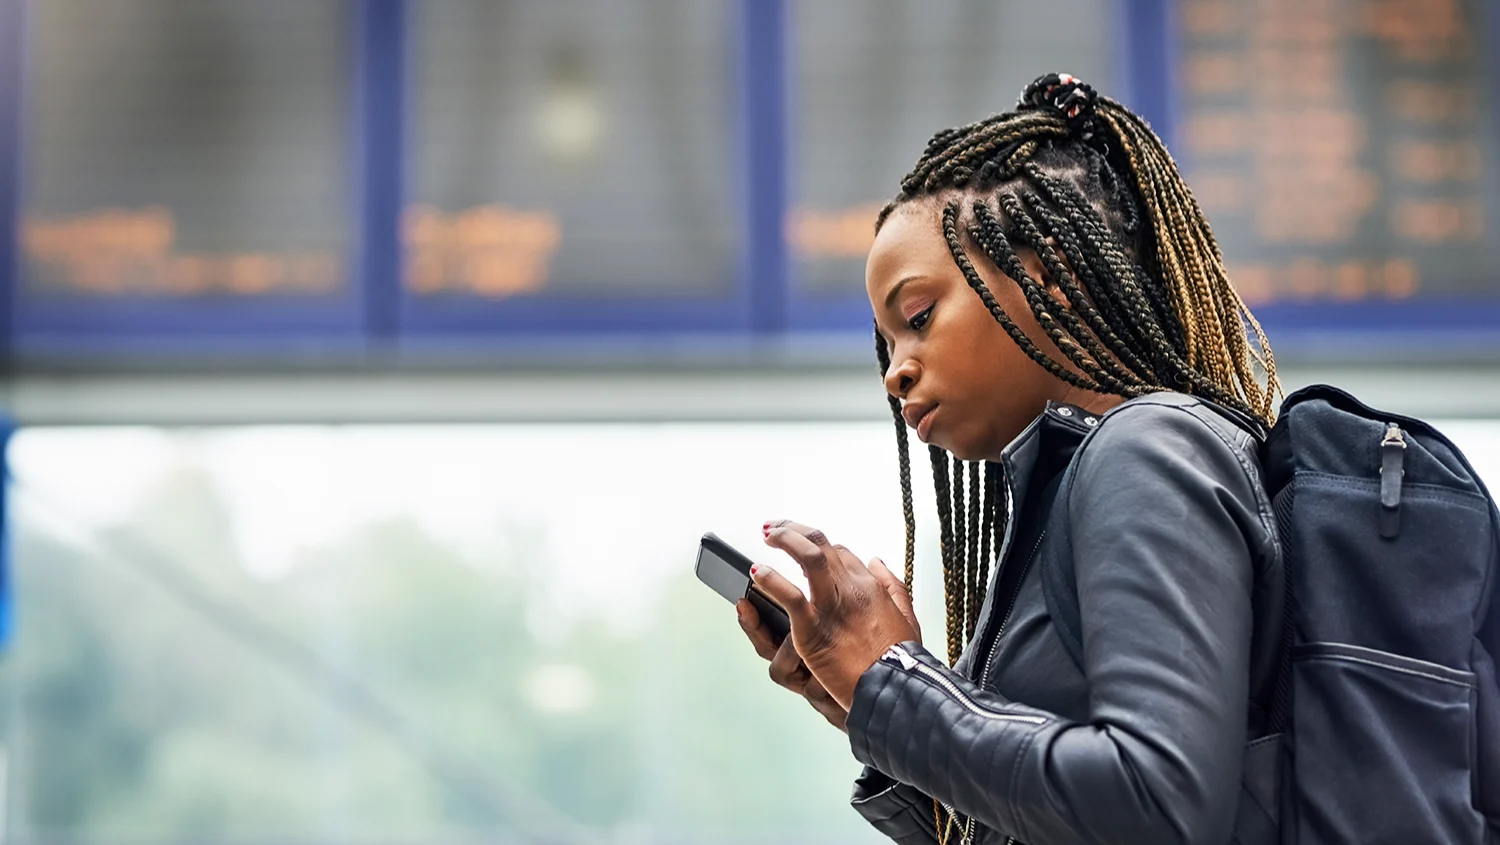 A young Black woman with braided hair checks her mobile phone at a railway station